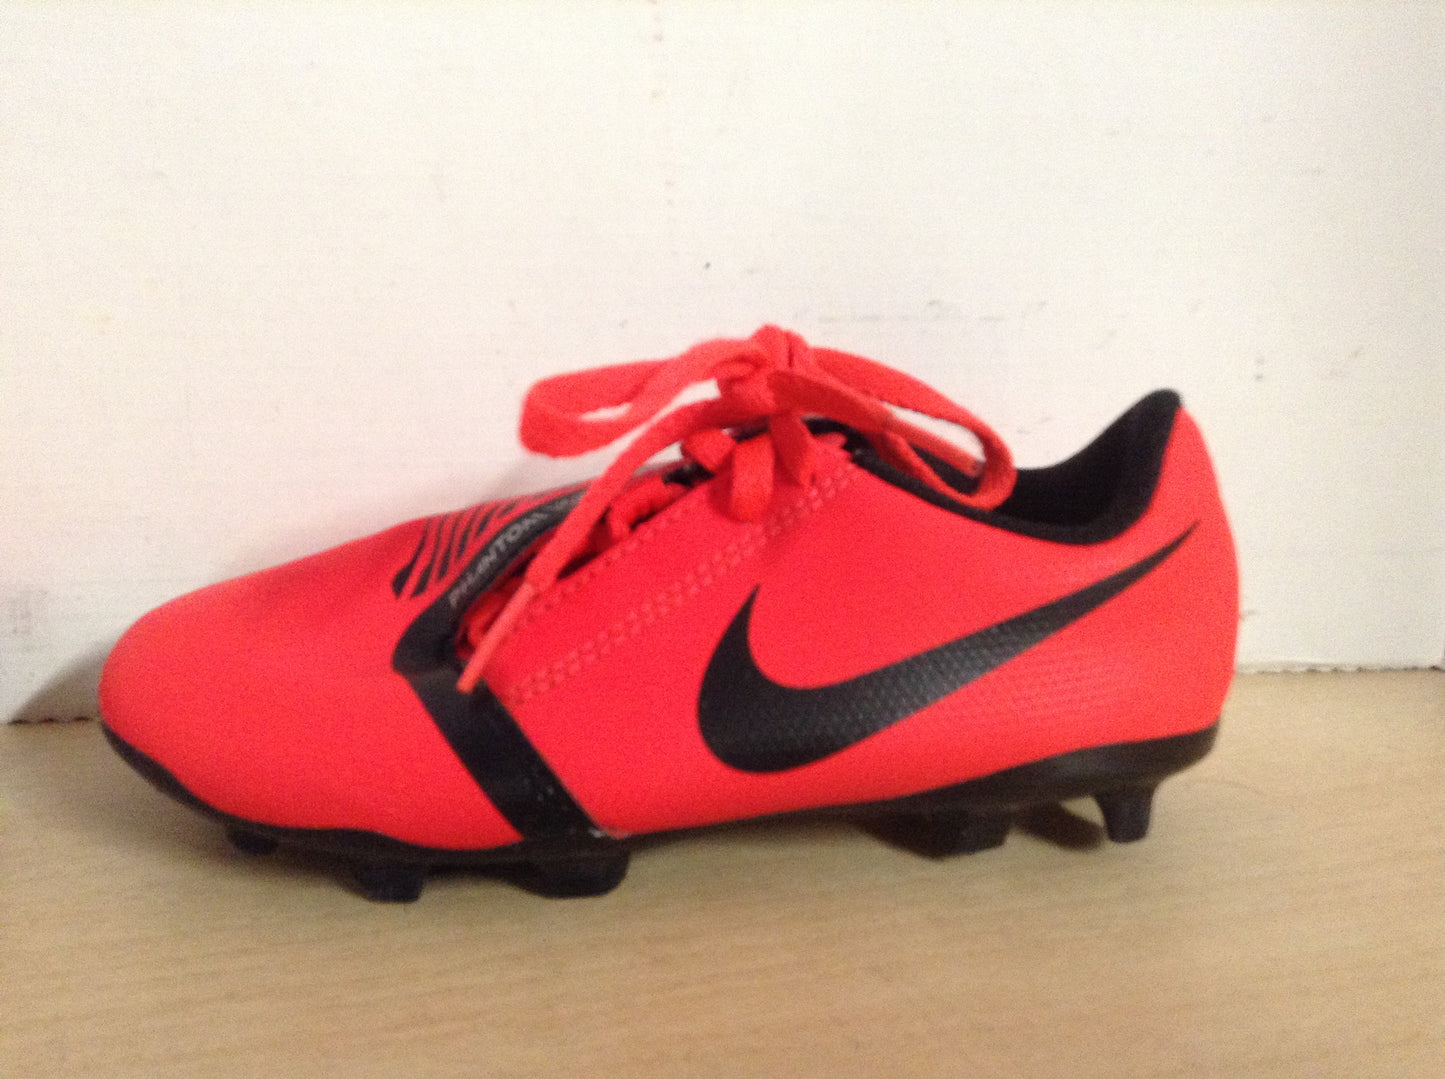 Soccer Shoes Cleats Child Size 13 Nike Phantom Red Black New Demo Model